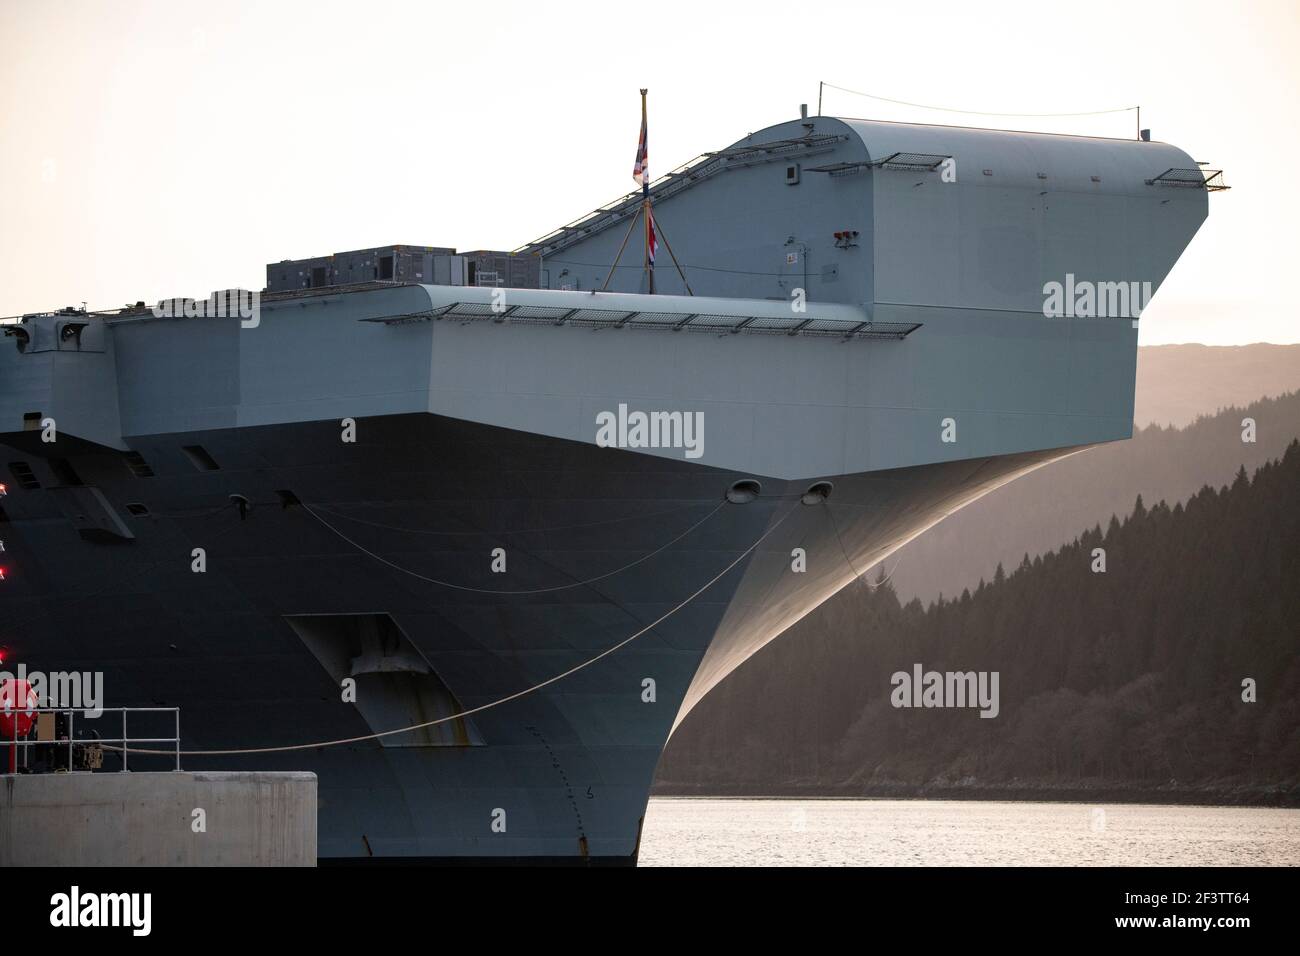 Finnart, Loch Long, Scotland, UK. 17 March 2021. The ramp of HMS Queen Elizabeth. HMS Queen Elizabeth is the largest and most advanced warships ever built for the Royal Navy. Both HMS Queen Elizabeth (pictured) and HMS Prince of Wales are the nation's flagships which weigh in a 65,000 tonnes and measure 280 meters in length. The Aircraft Carrier is currently berthed on the side of Long Loch at Glen Mallan taking on fuel, munitions and other supplies, ahead of naval exercises which are part of the UK Carrier Strike Group 2021. The ship is due to leave on Sunday. Credit: Colin Fisher Stock Photo